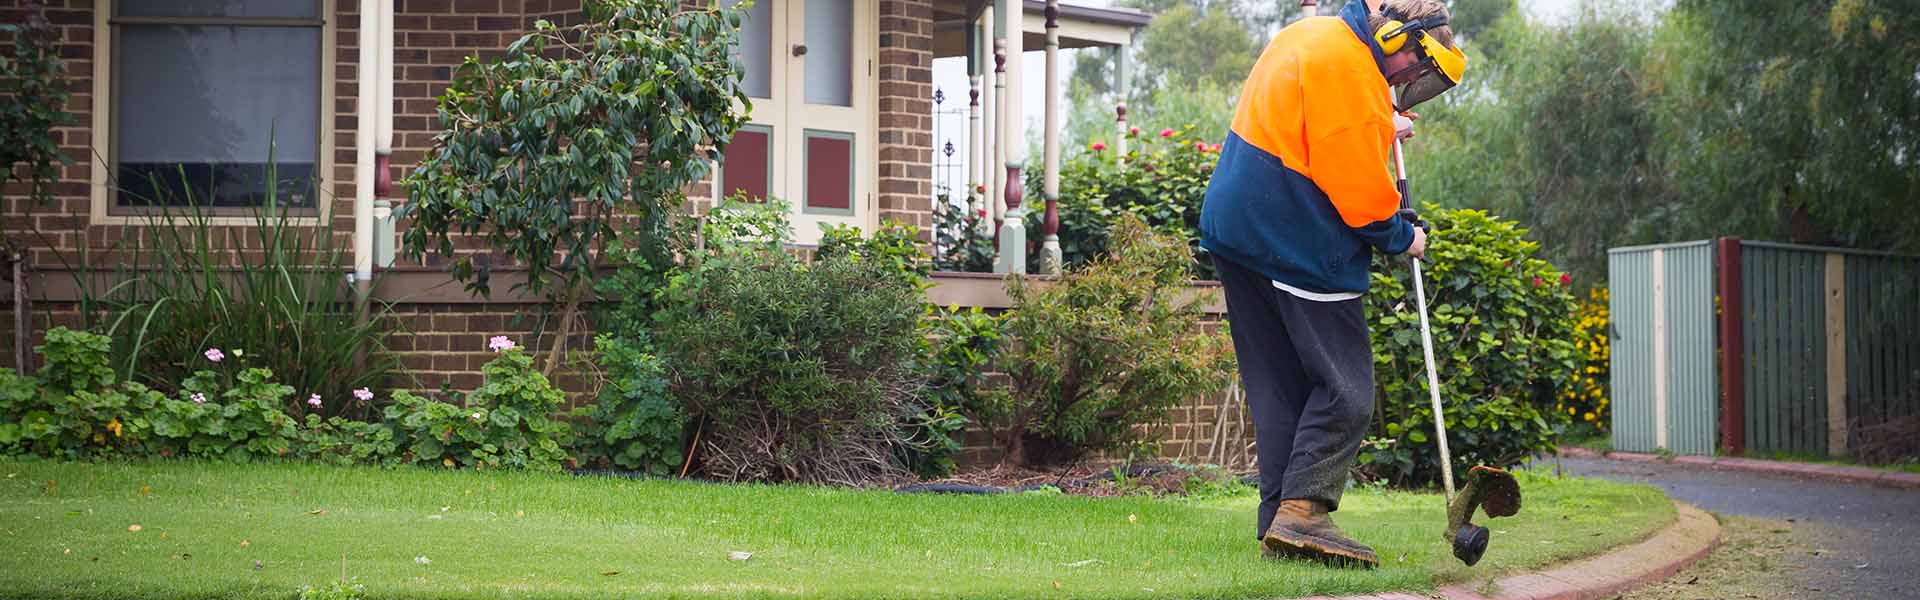 New Geelong gardening service creating jobs for people with a disability –  Gateways Support Services Inc.